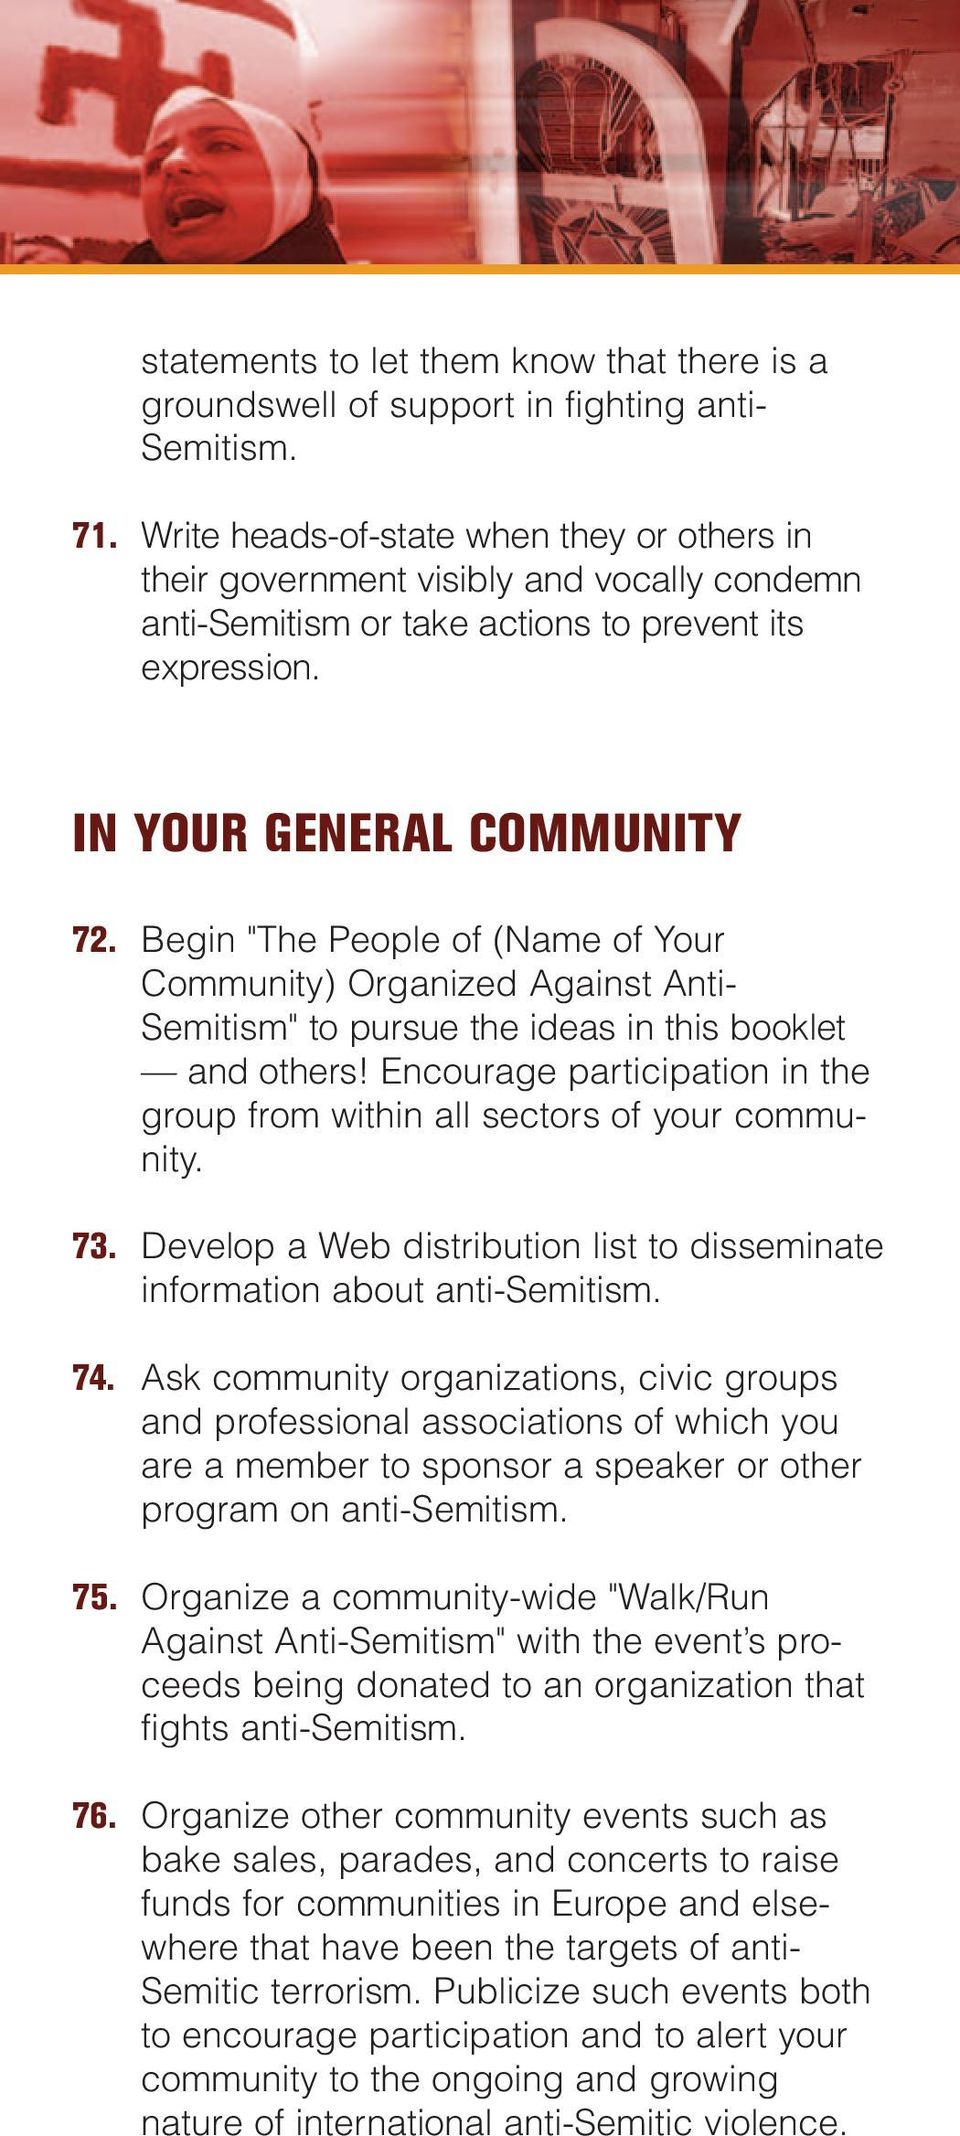 Begin "The People of (Name of Your Community) Organized Against Anti- Semitism" to pursue the ideas in this booklet and others!